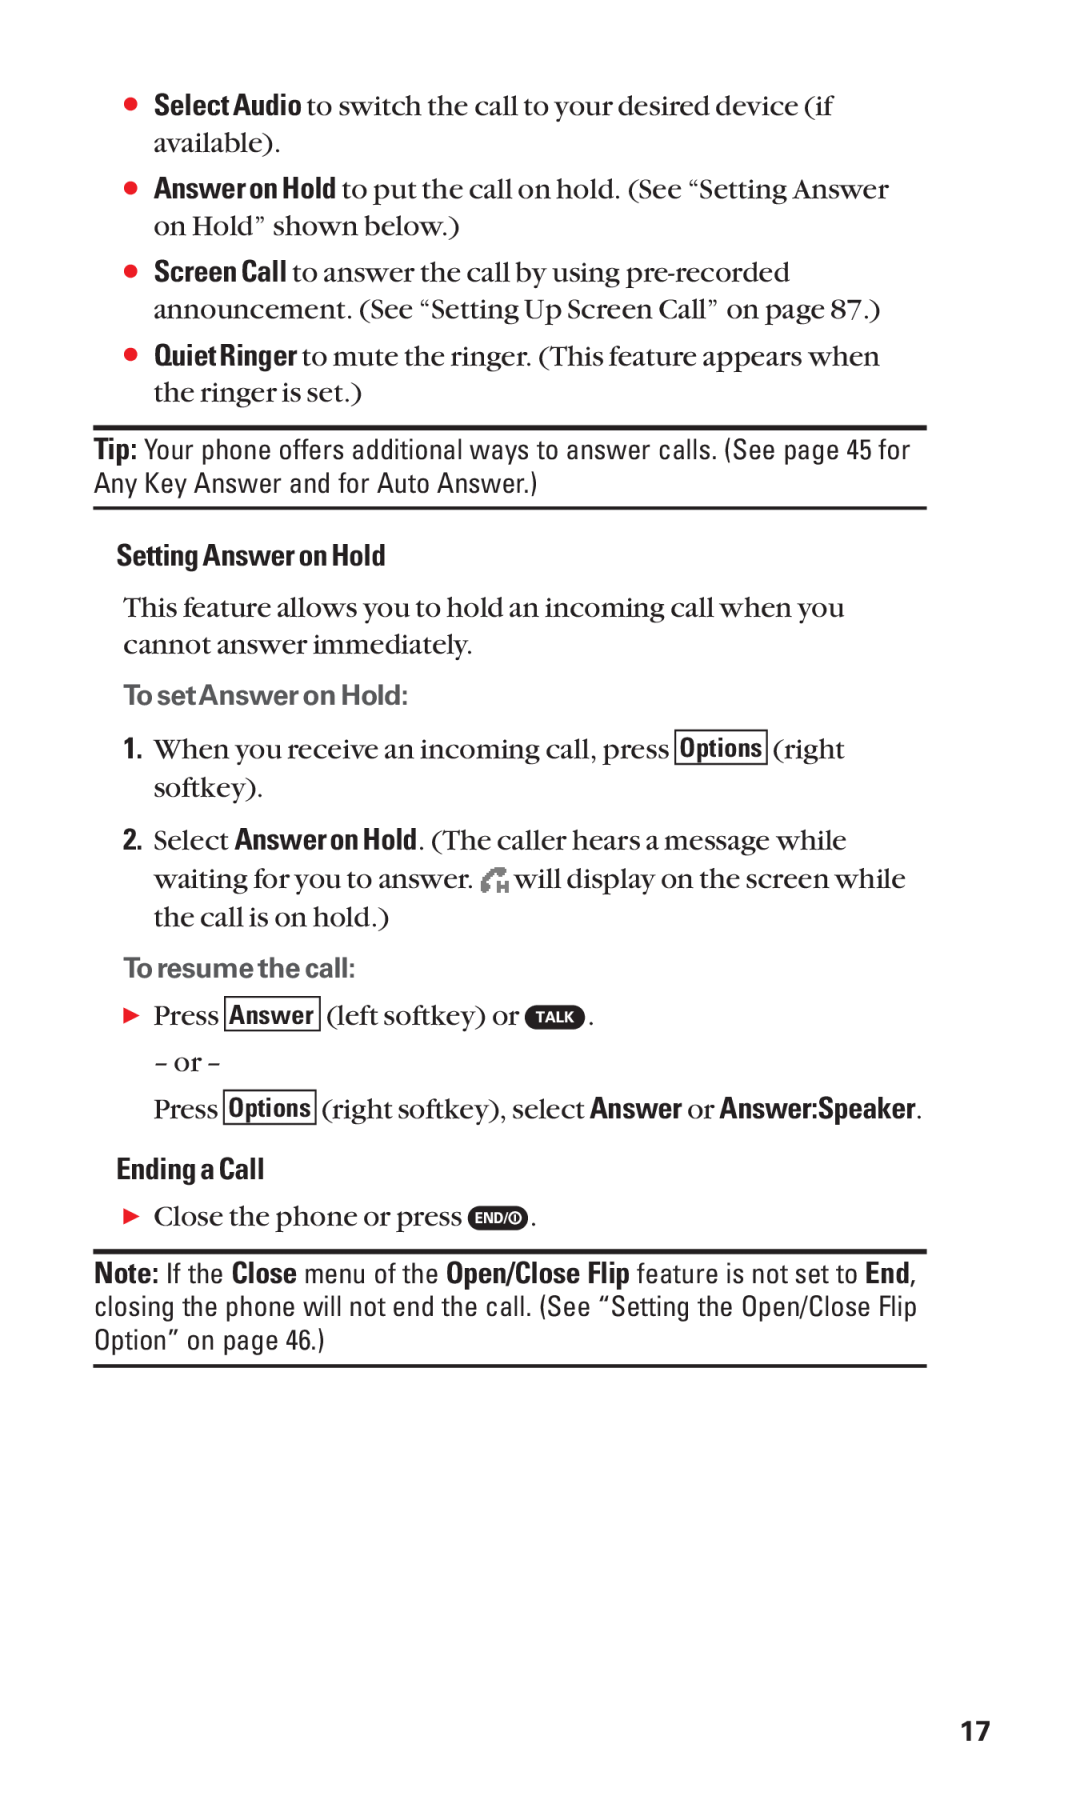 Sanyo SCP-7050 manual Setting Answer on Hold, Ending a Call, To setAnswer on Hold, To resume the call 